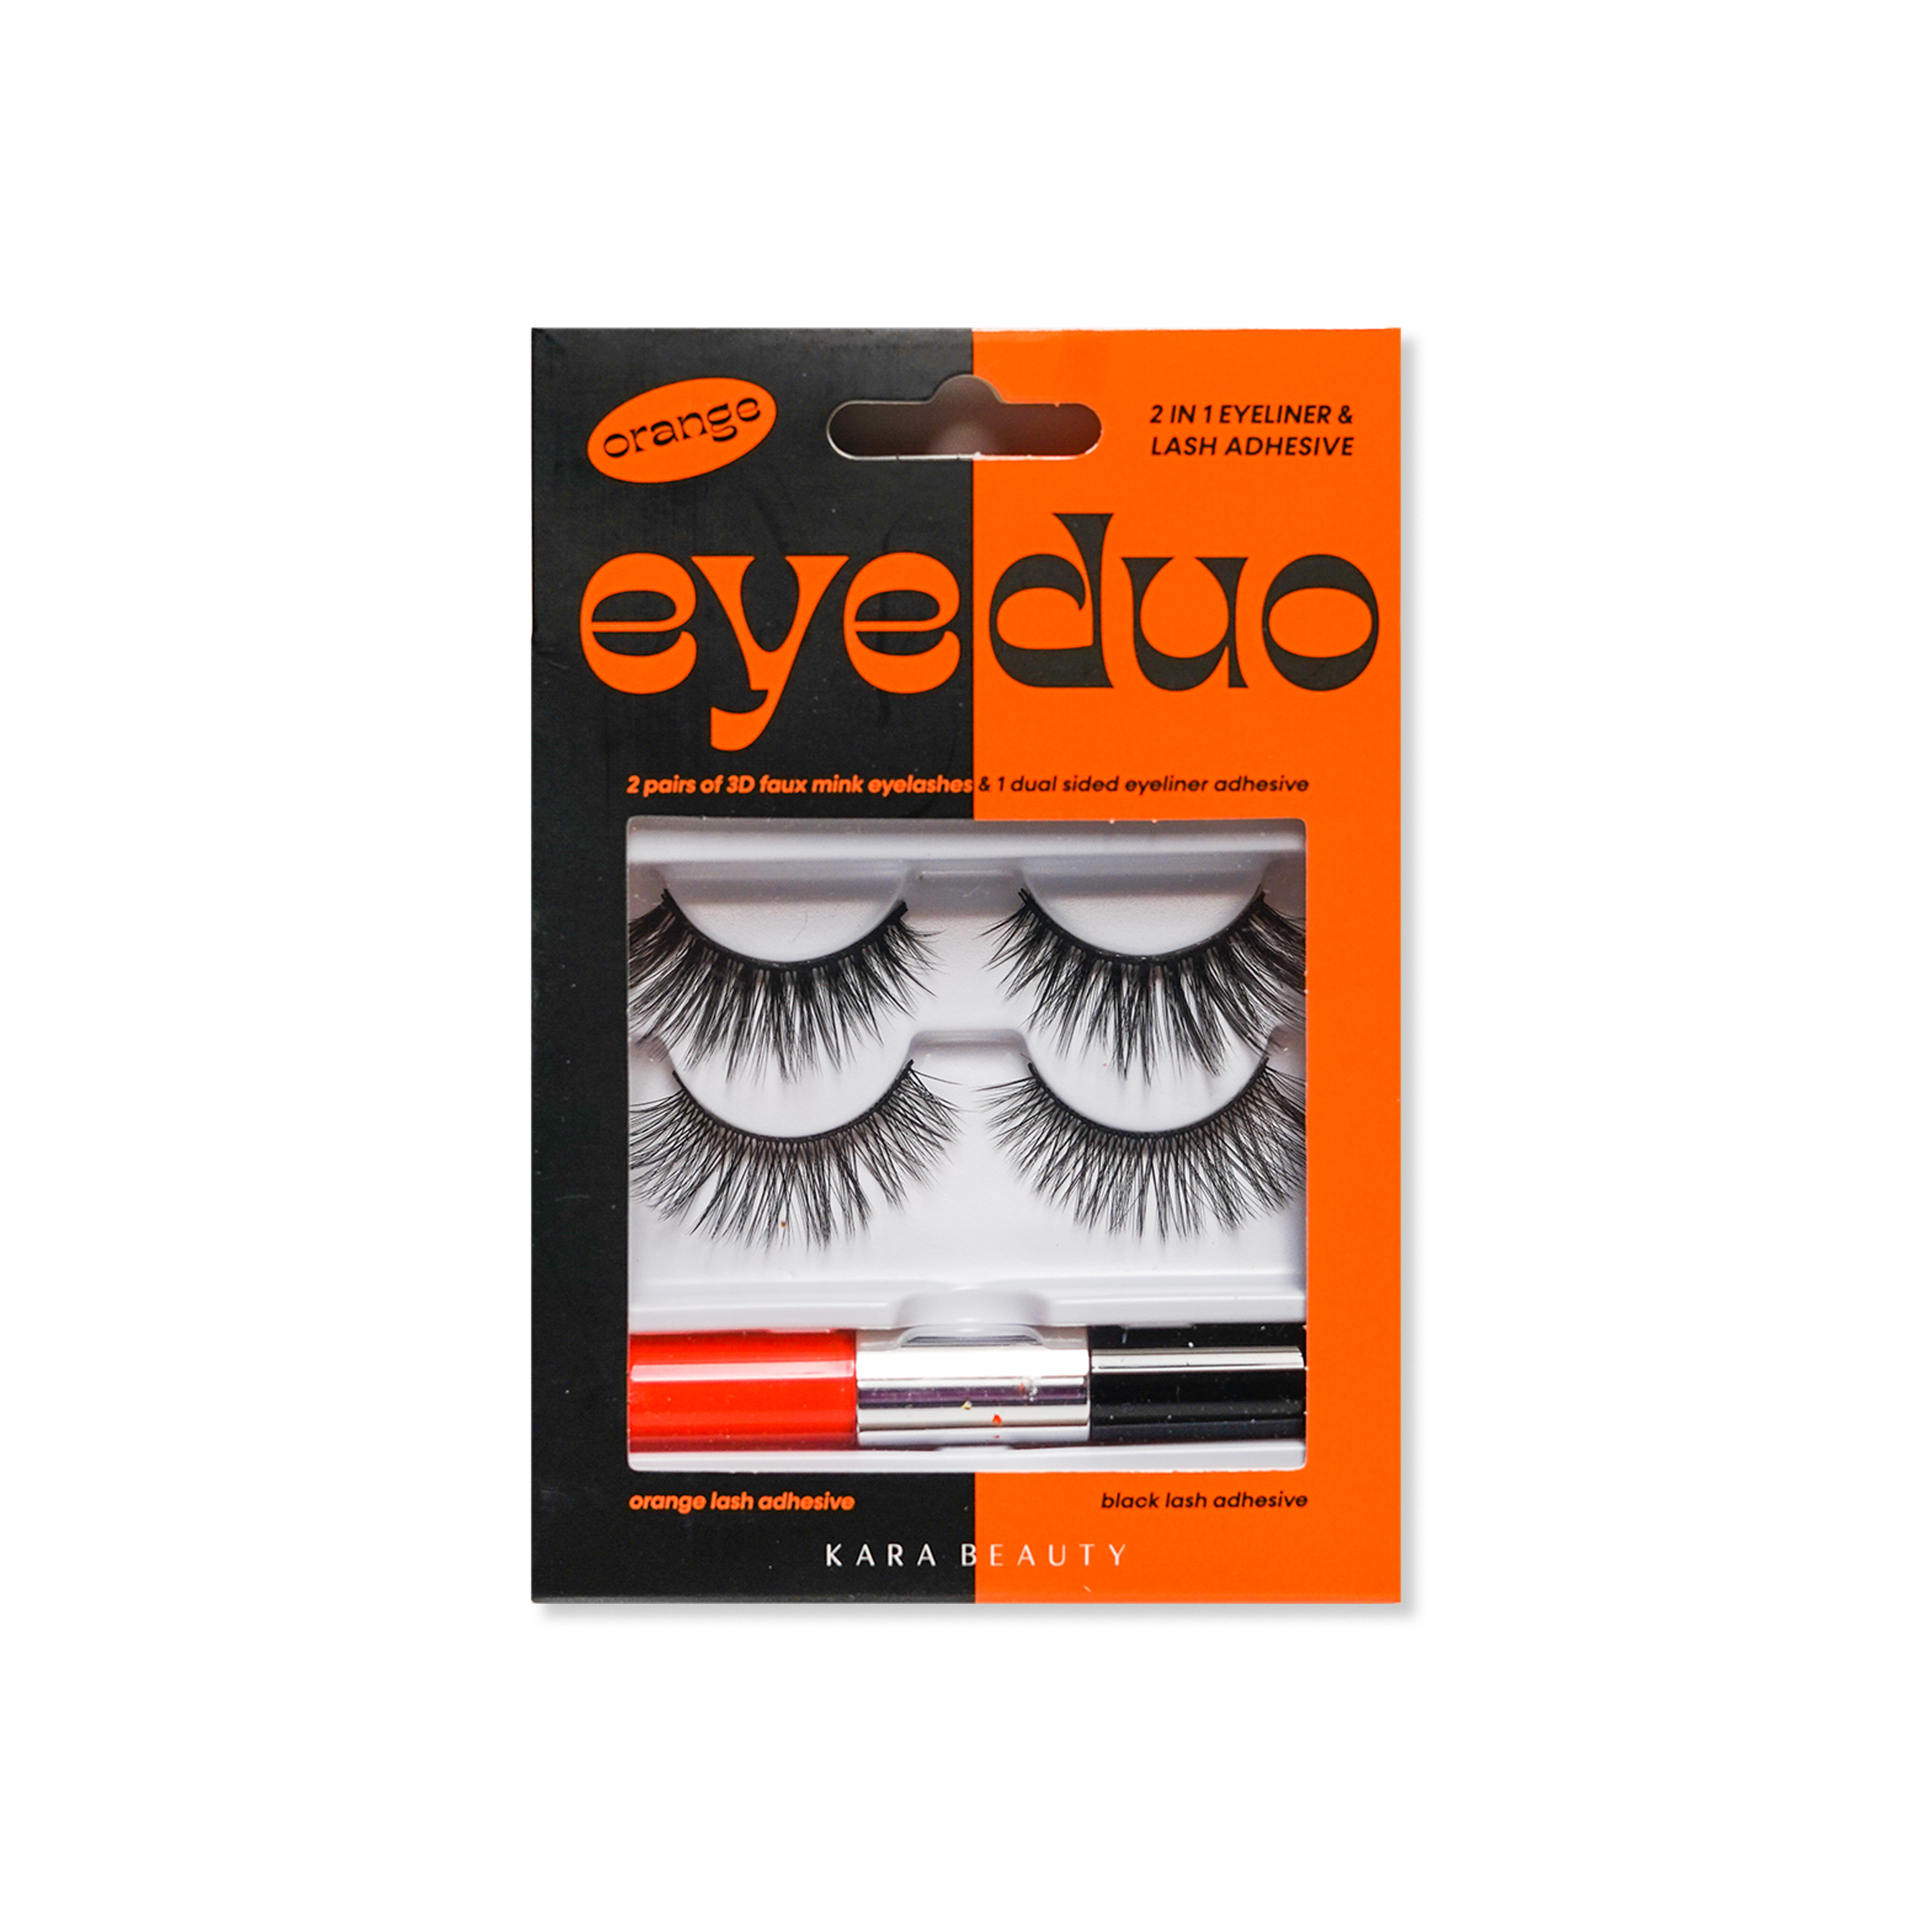 Kara Beauty's Eye Duo 2 Assorted Lashes and 2-in-1 Orange and Black  Liner and lash adhesive